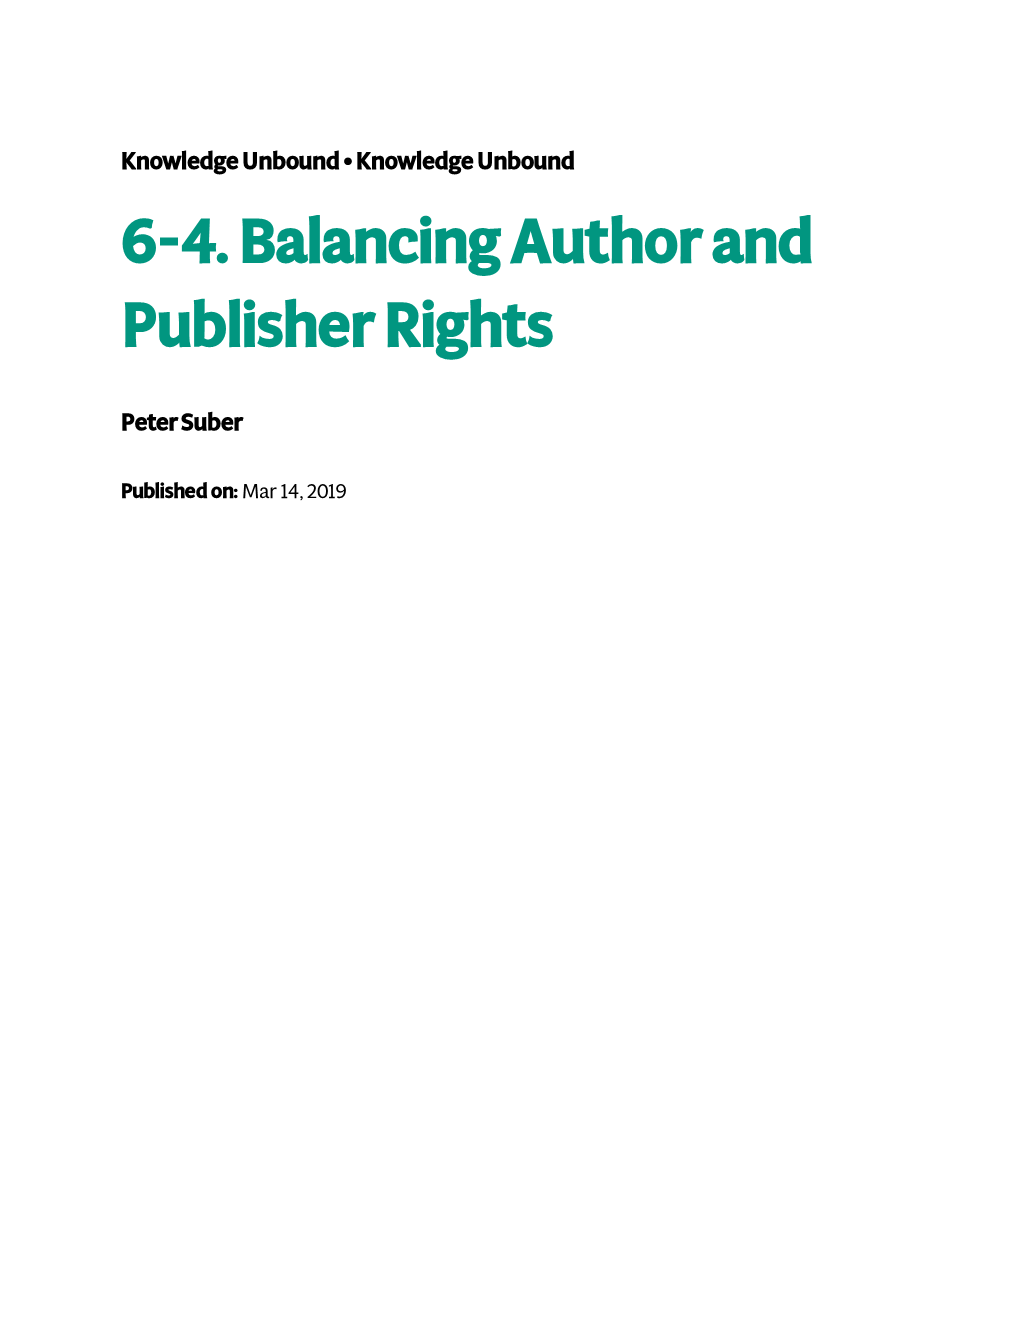 6-4. Balancing Author and Publisher Rights